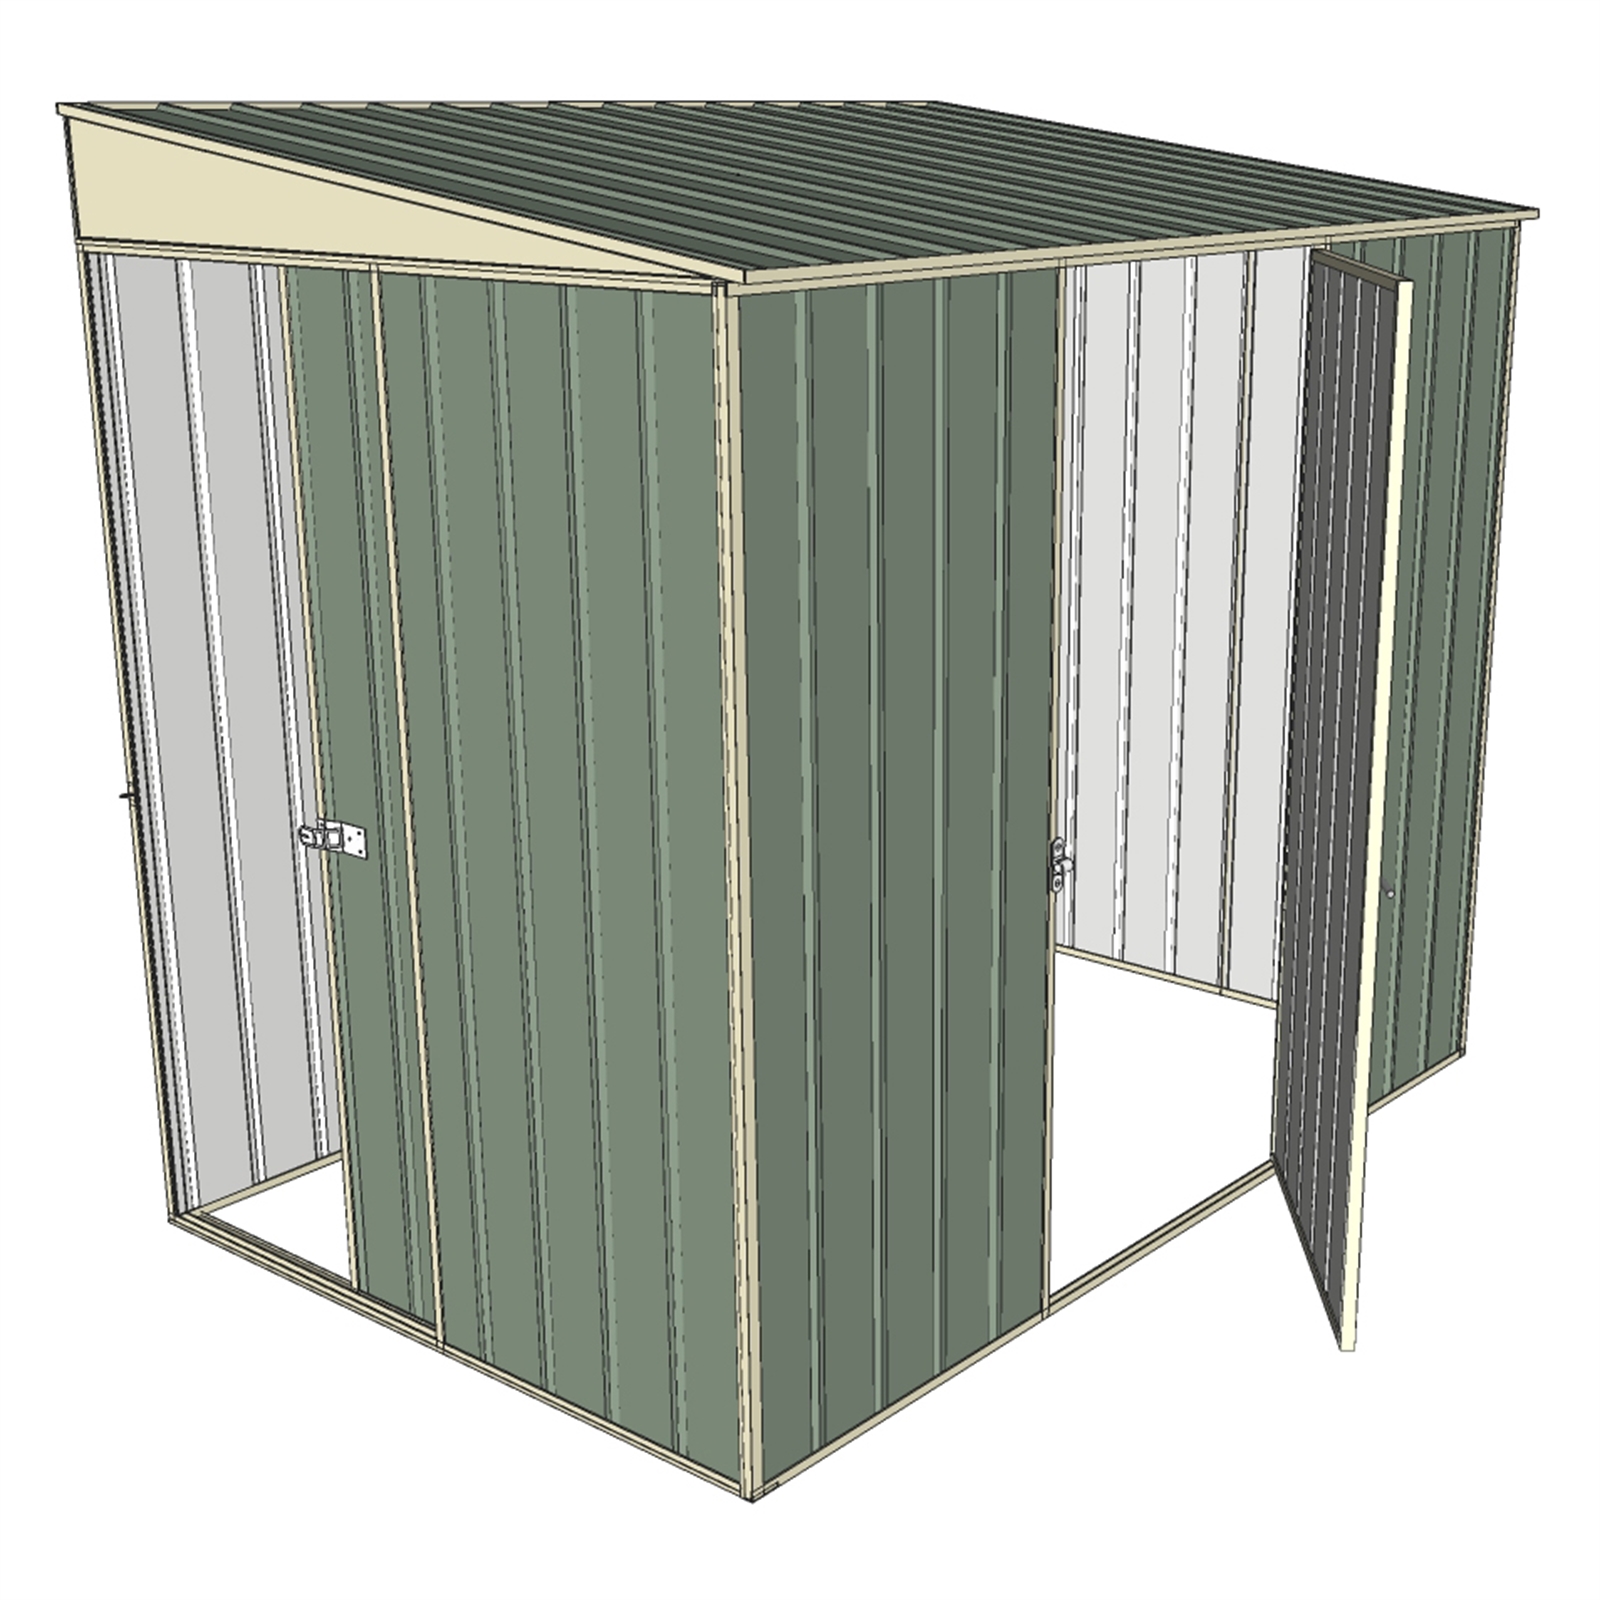 Build-a-Shed 2.3 x 1.5 x 2.0m Green Skillion Two Single Hinged Doors Narrow Shed